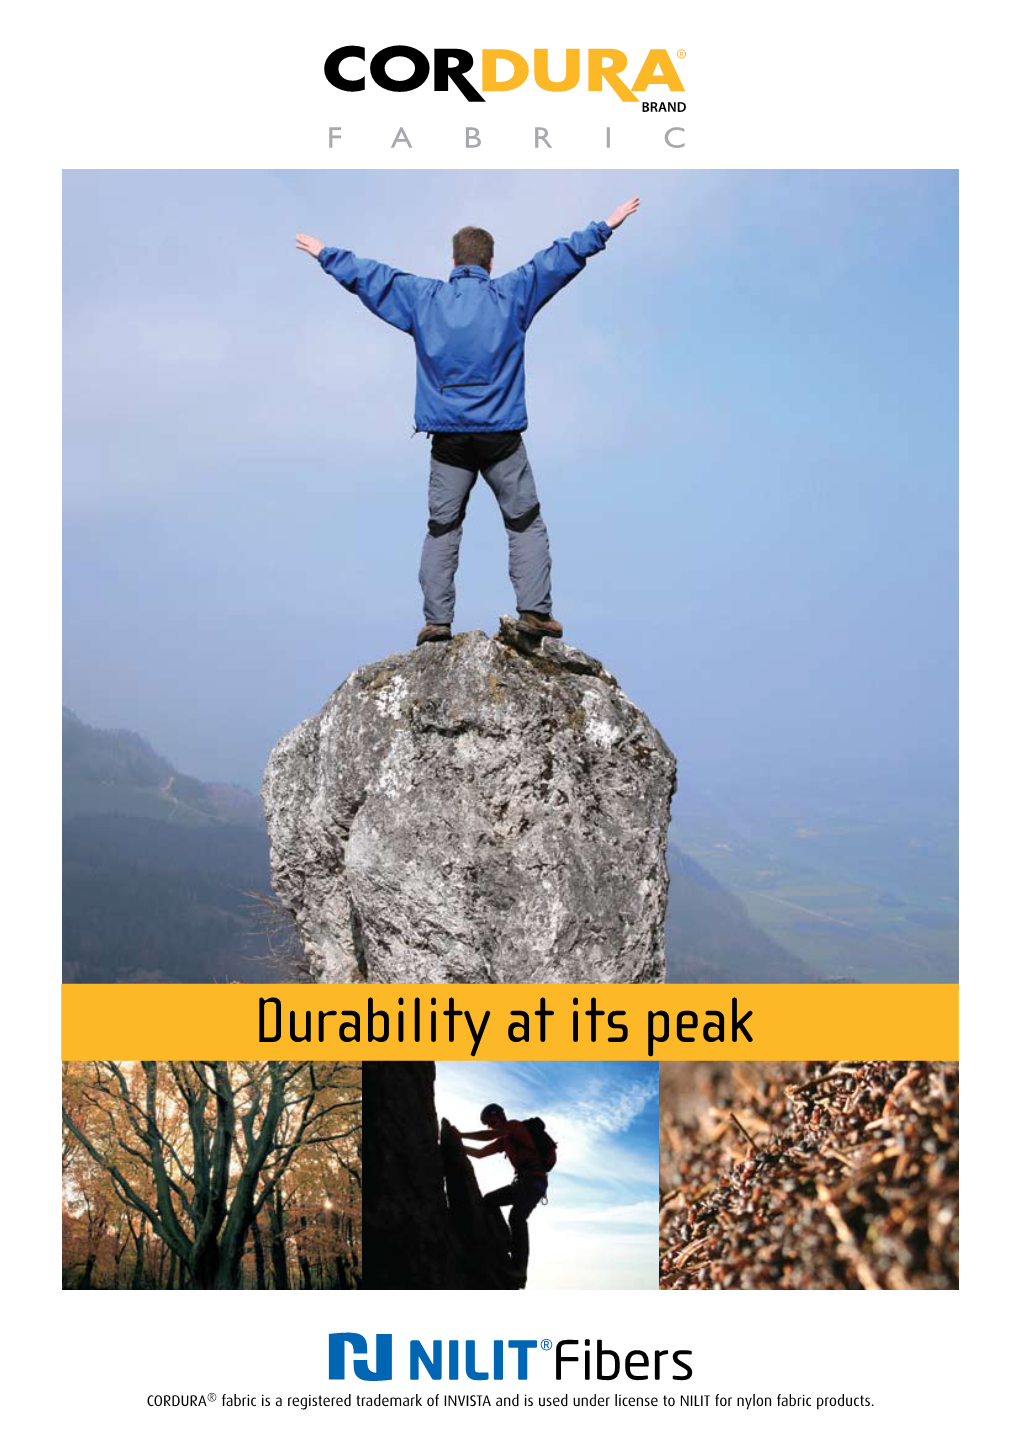 When Durability Counts, Rely on CORDURA® Brand Fabric